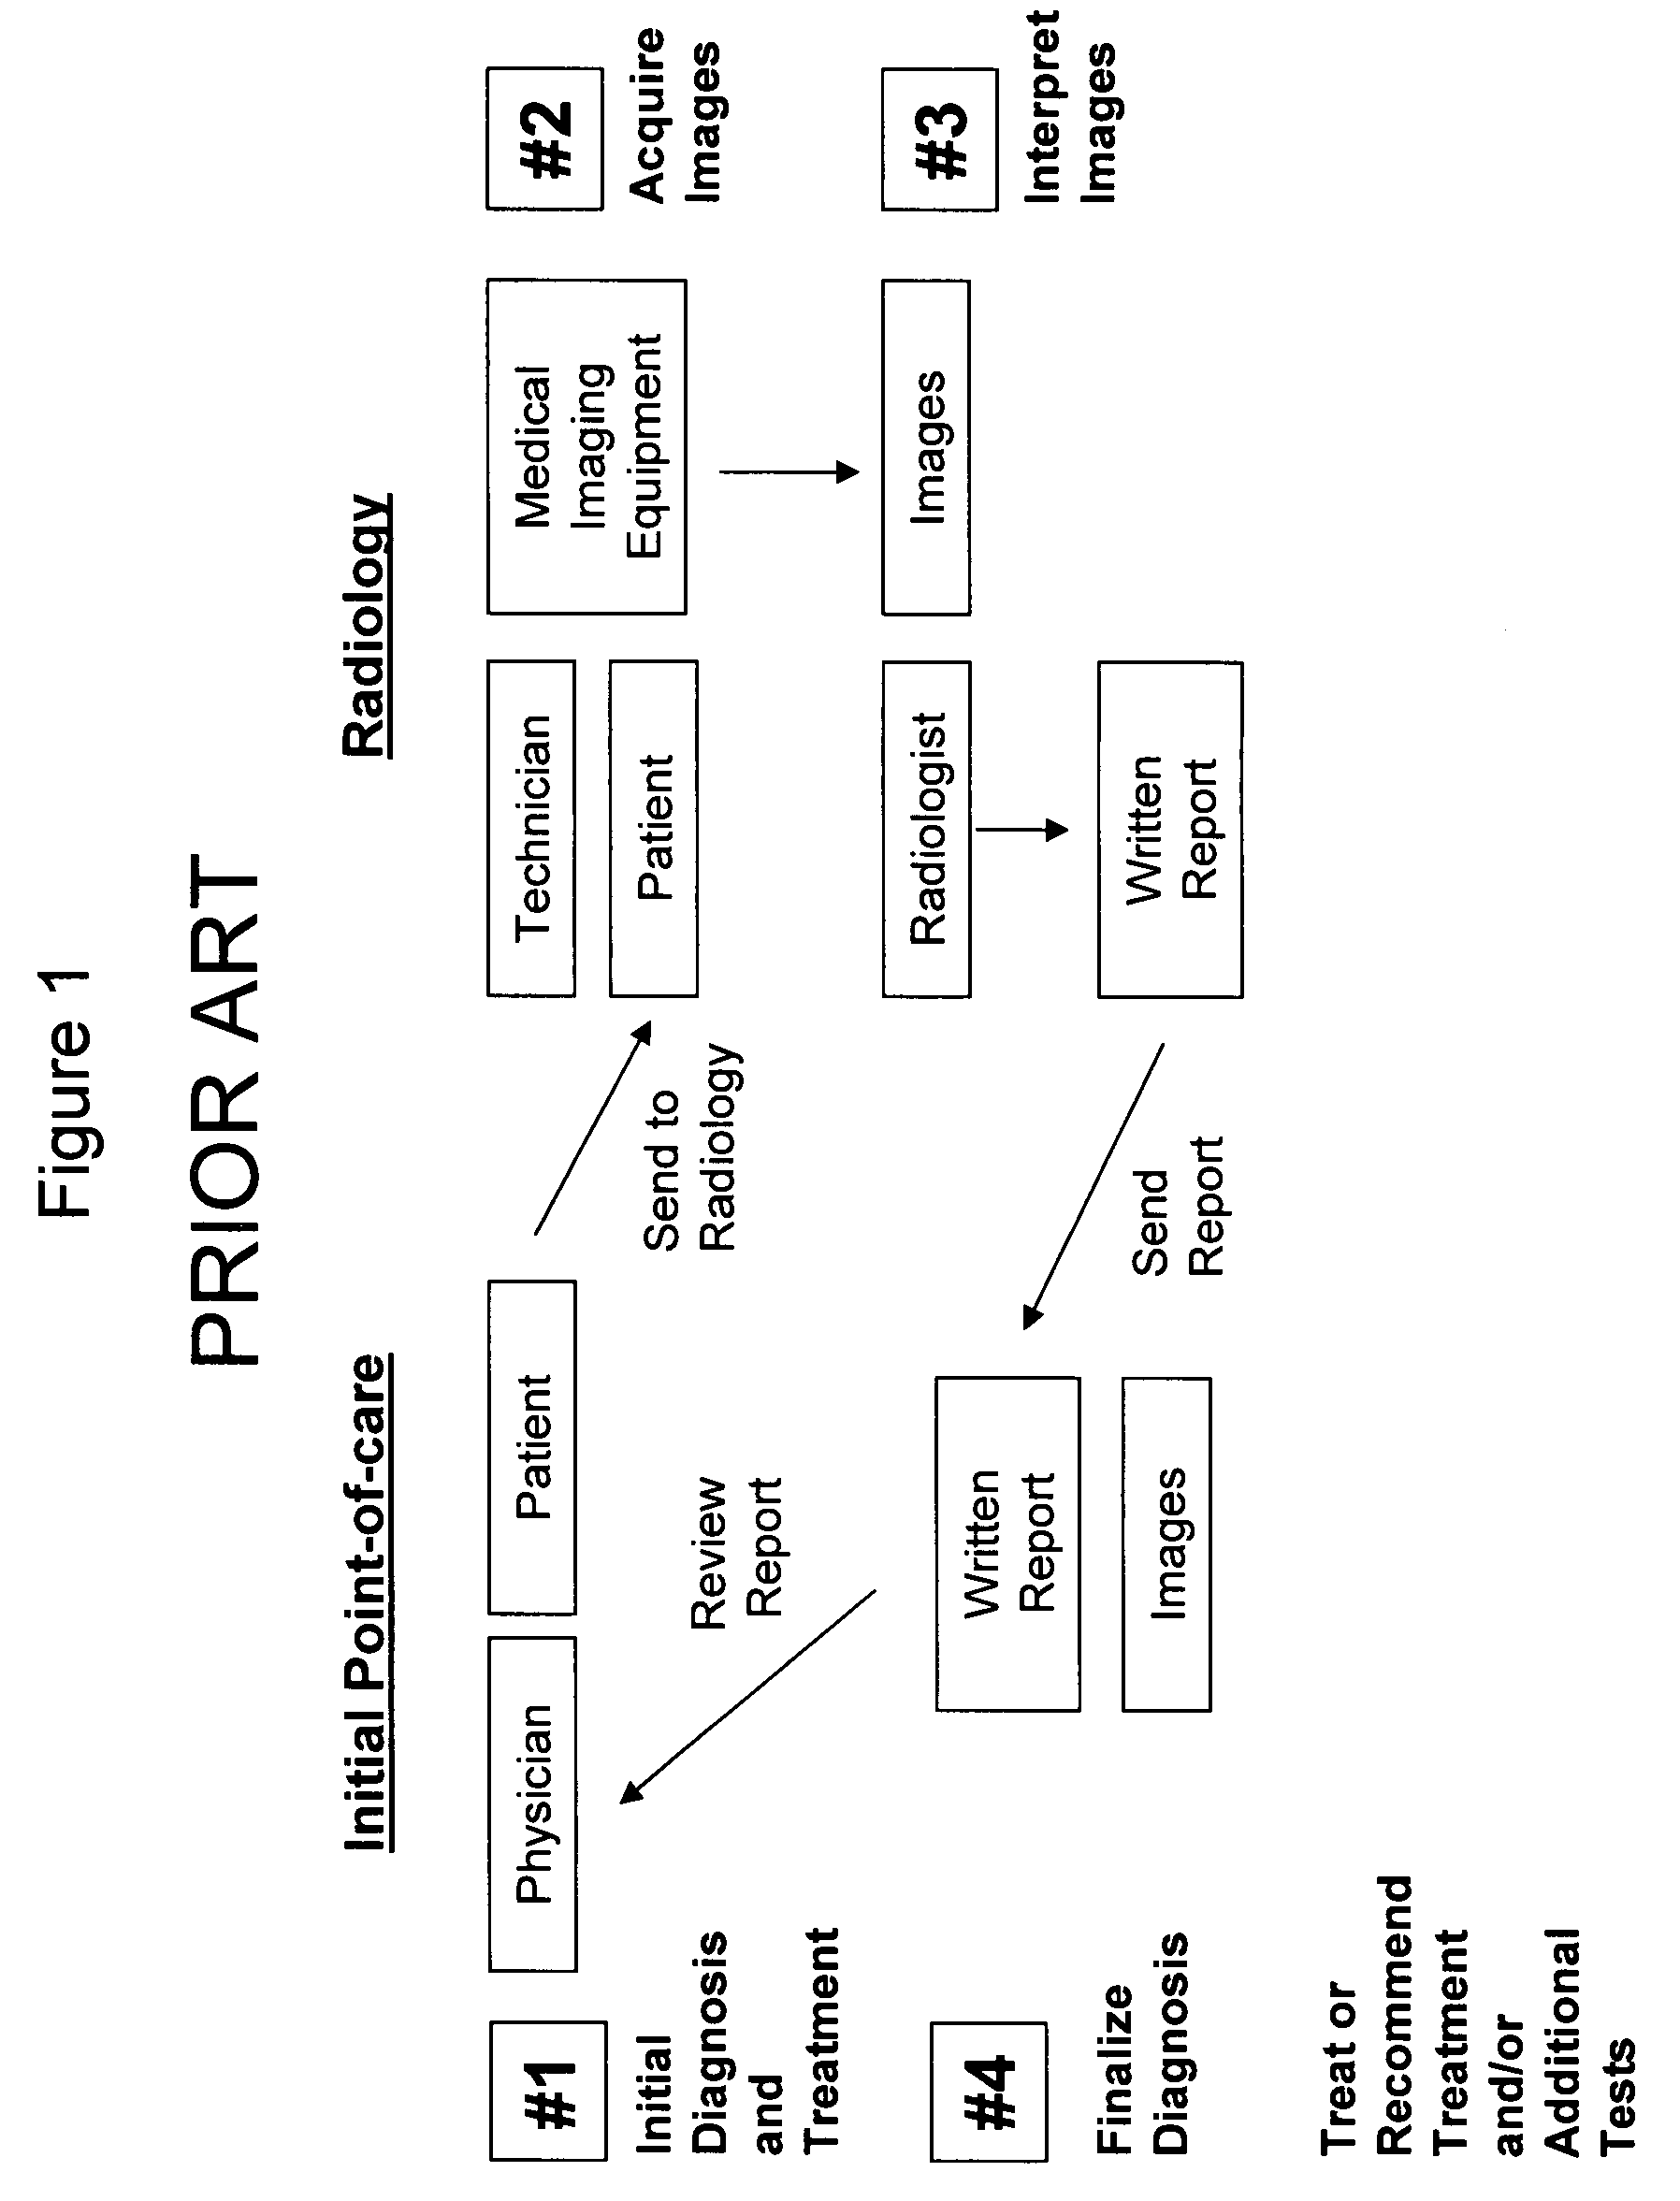 Medical imaging examination review and quality assurance system and method